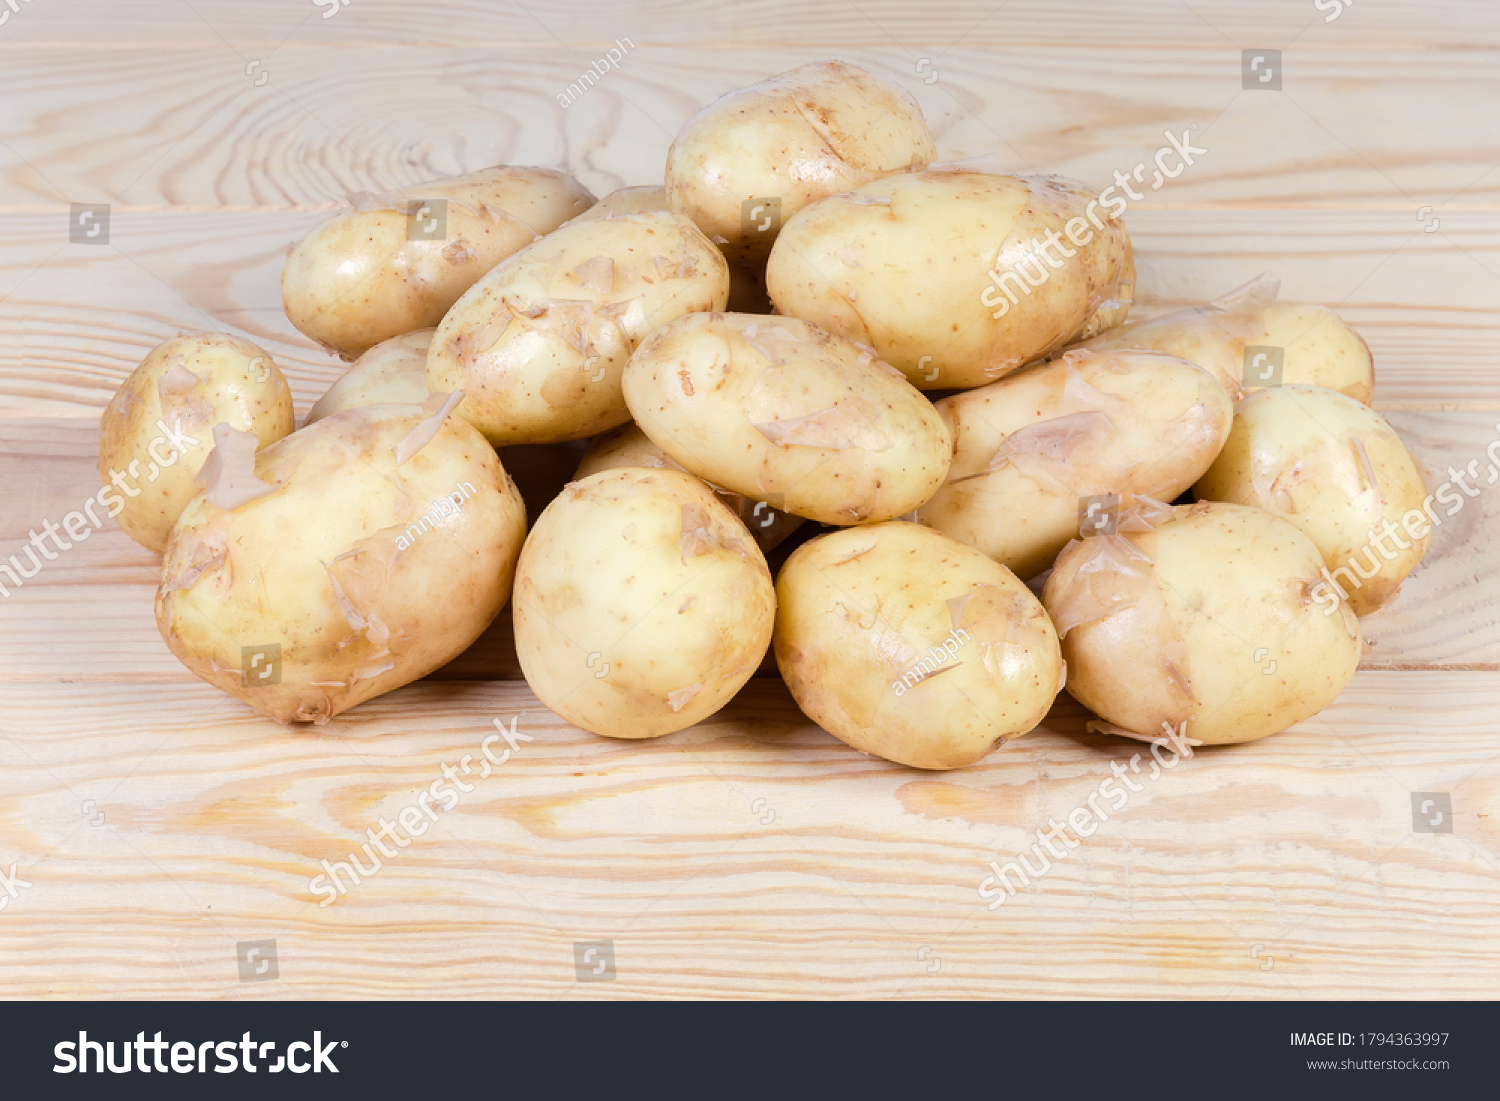 Pile of the raw washed yellow young potatoes with unpeeled thin skin on the rustic table #1794363997